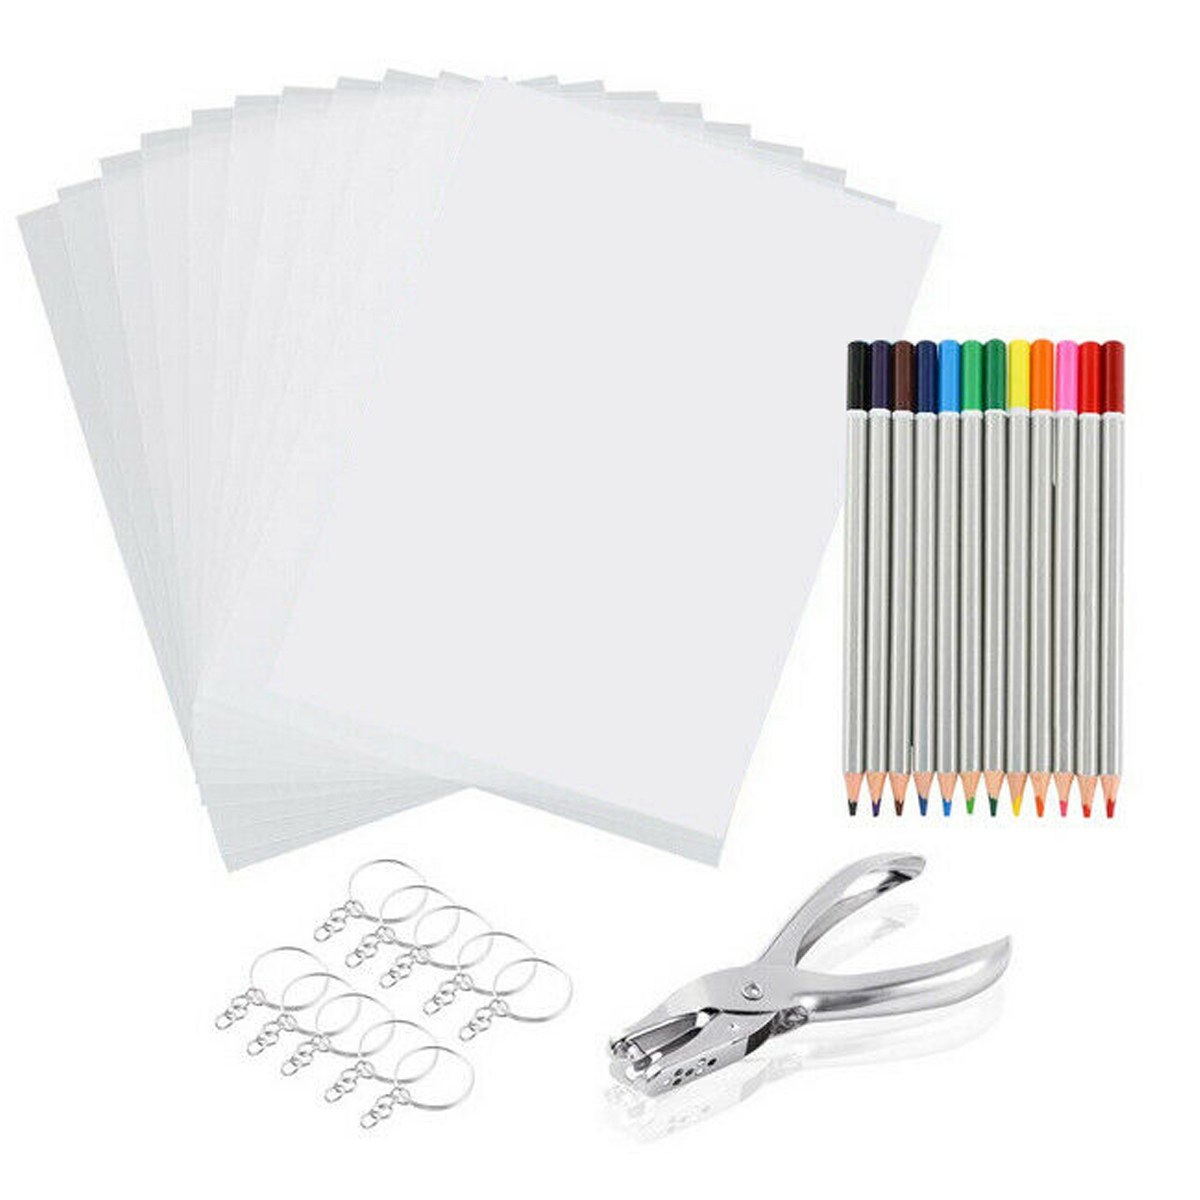 Find 198Pcs/145Pcs/33Pcs DIY Heat Shrink Plastic Sheet Kit Shrinky Art Paper Hole Punch Keychains Pencils for Sale on Gipsybee.com with cryptocurrencies